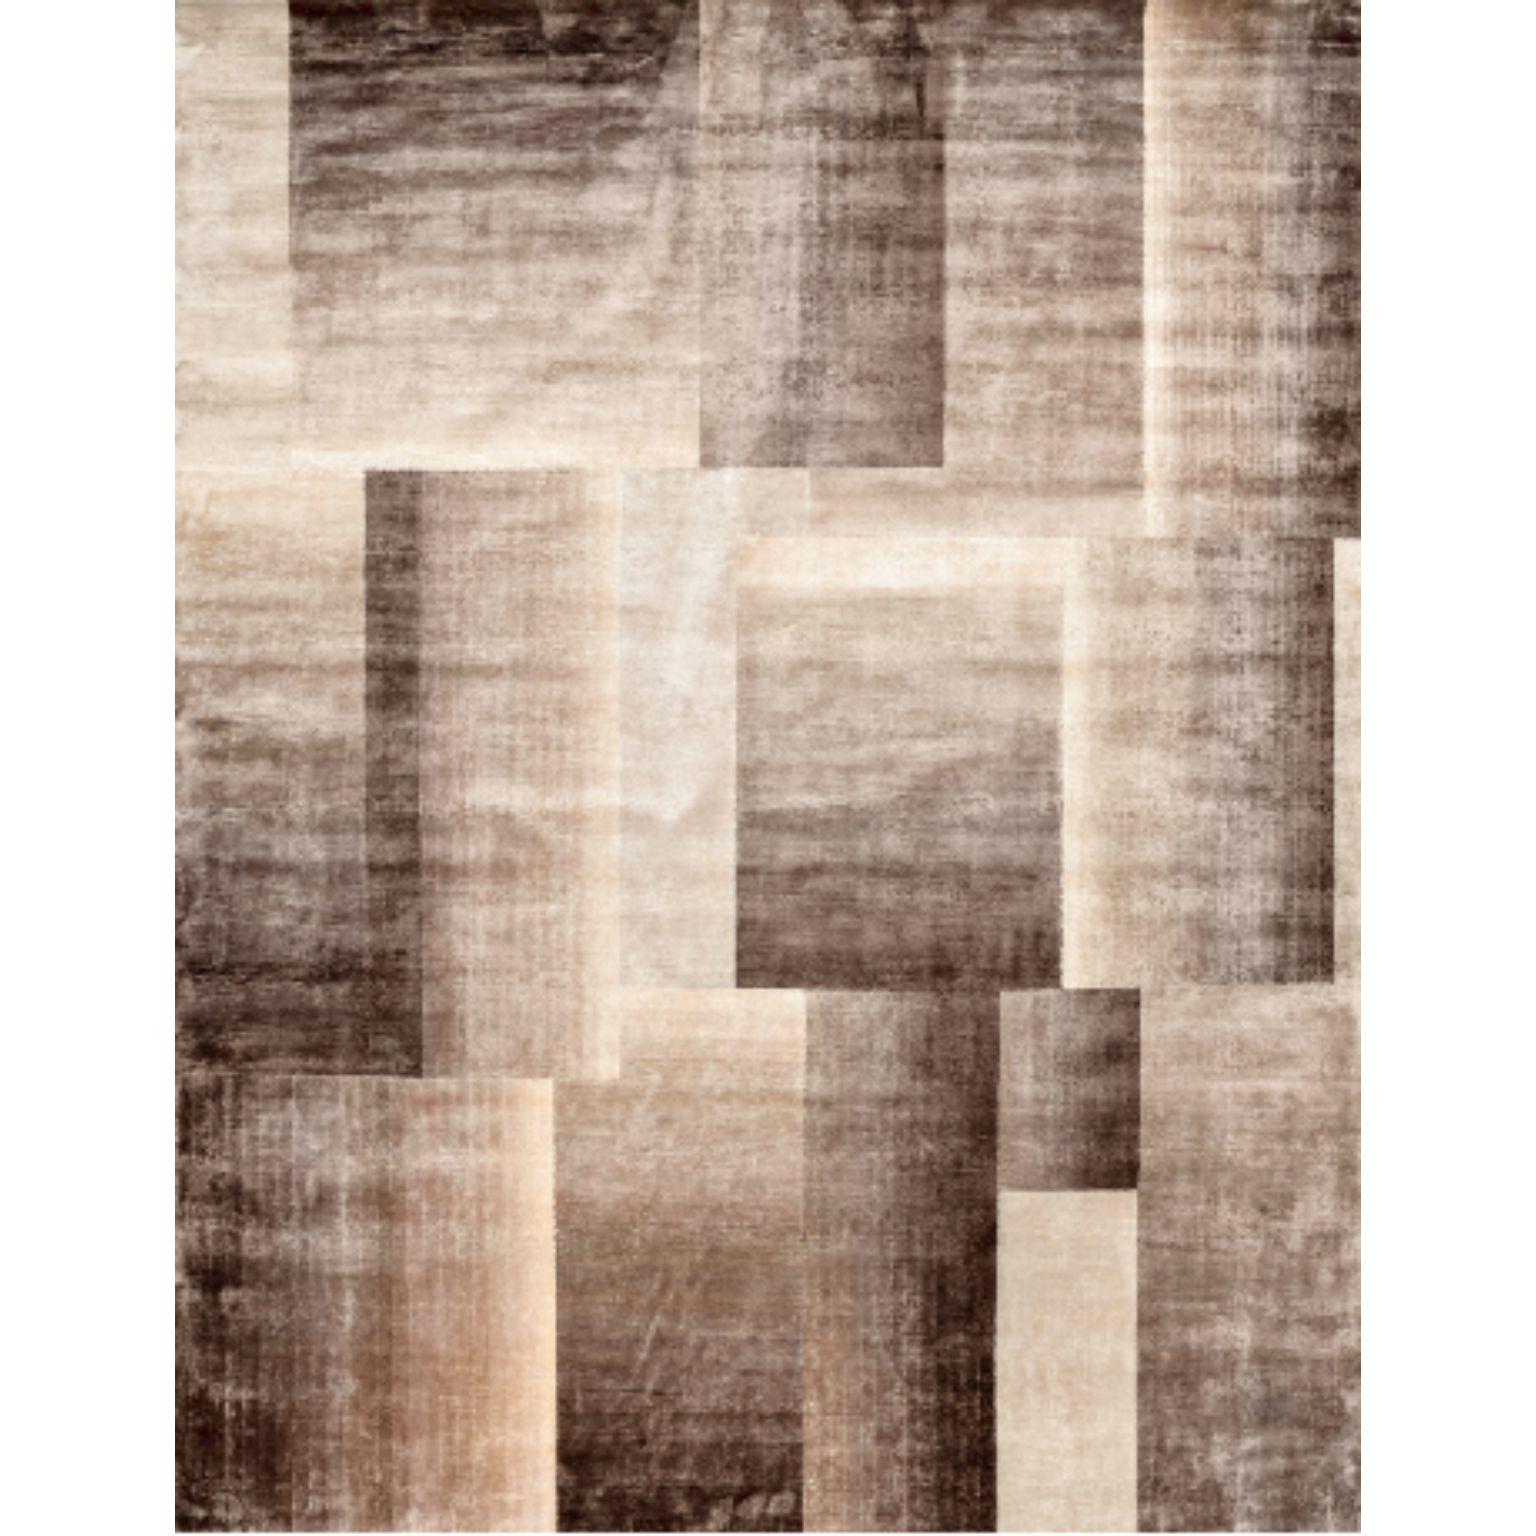 PACIFICO 200 rug by Illulian
Dimensions: D300 x H200 cm 
Materials: Wool 50%, Silk 50%
Variations available and prices may vary according to materials and sizes.

Illulian, historic and prestigious rug company brand, internationally renowned in